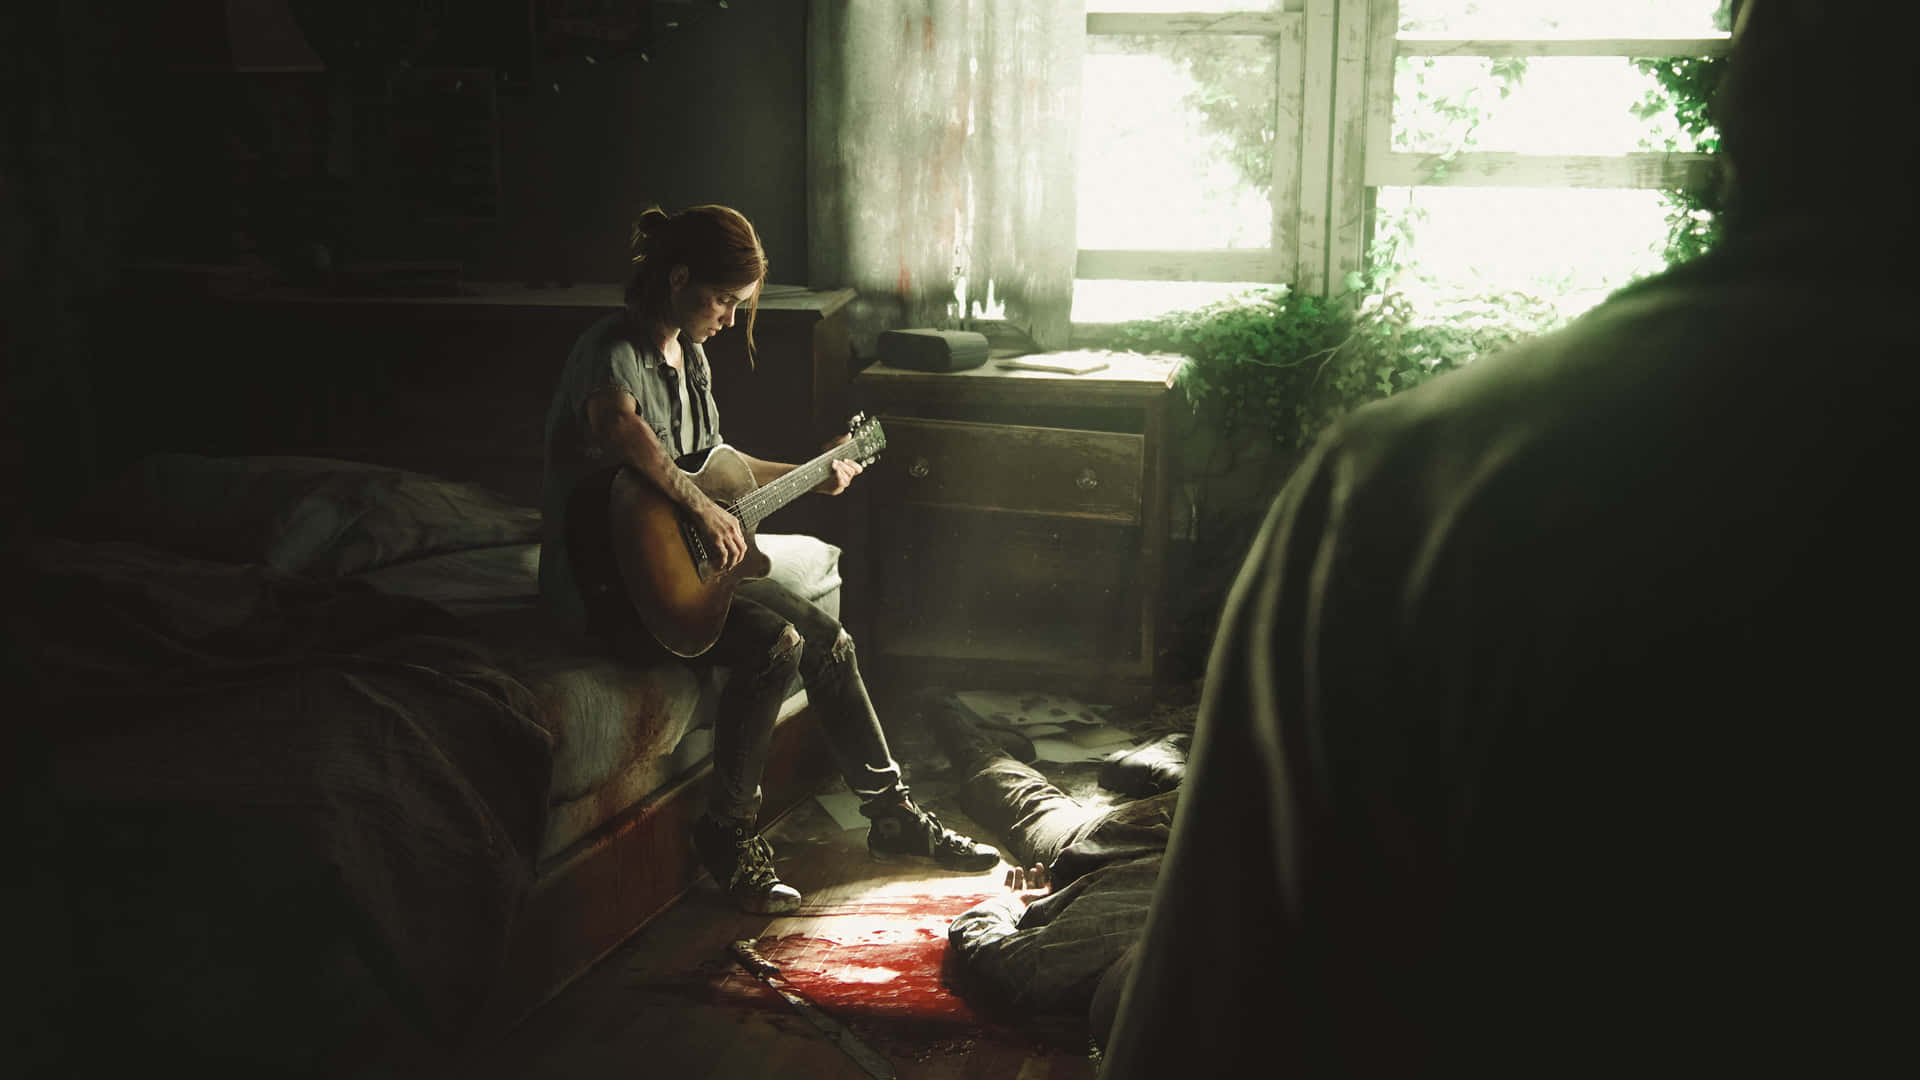 Caption: Ellie and Joel exploring post-apocalyptic world in The Last Of Us